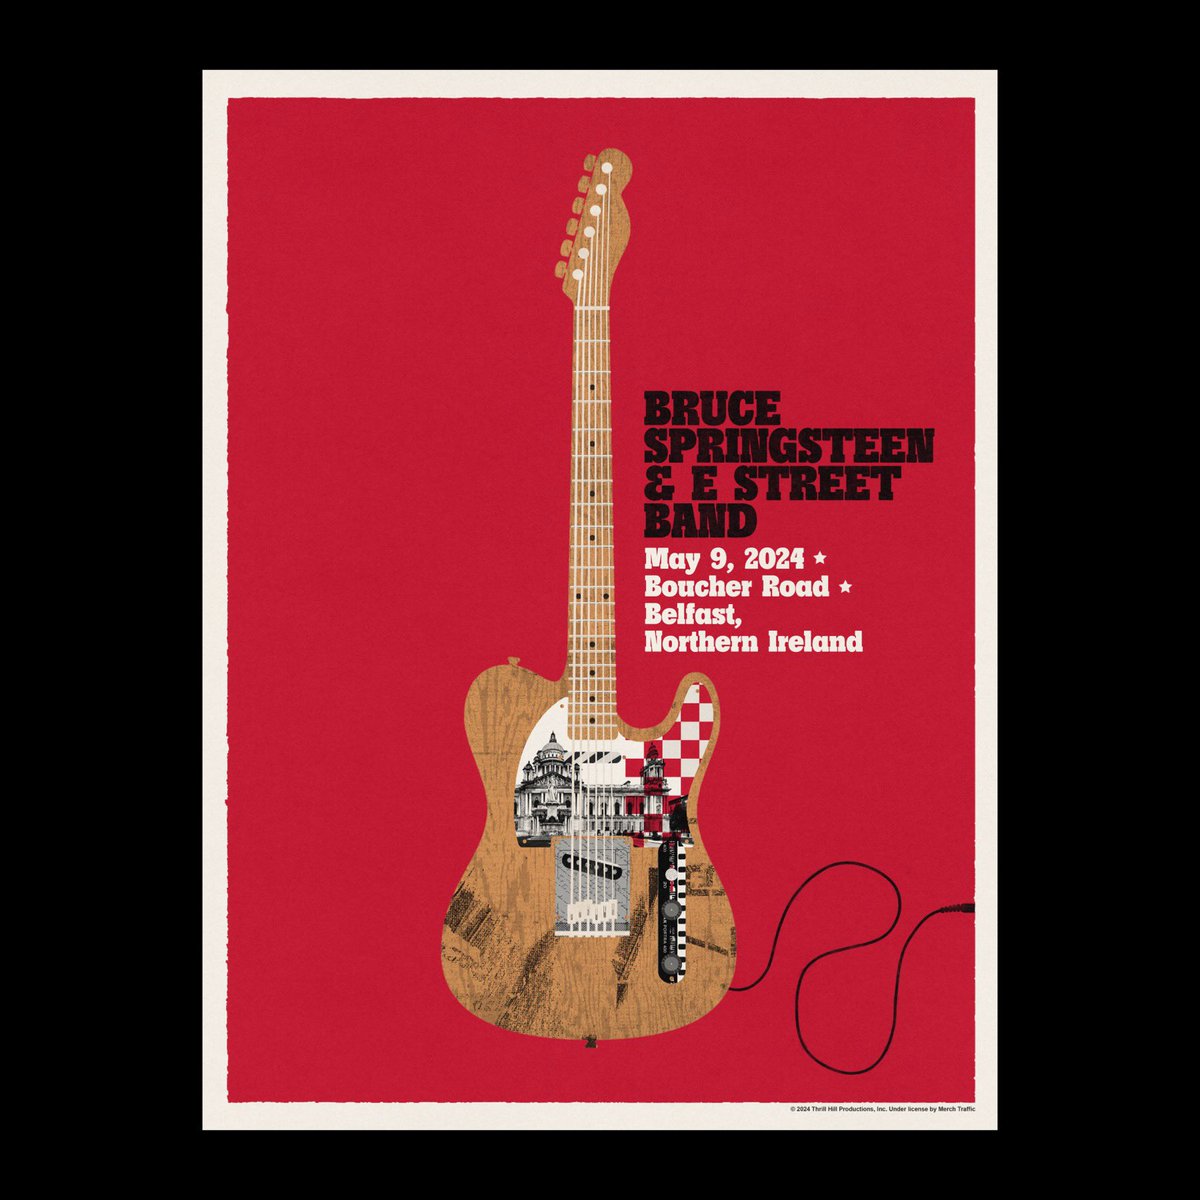 Here is the latest official gig poster in the series Ive designed for @springsteen in #Belfast tonight needledesign.bigcartel.com